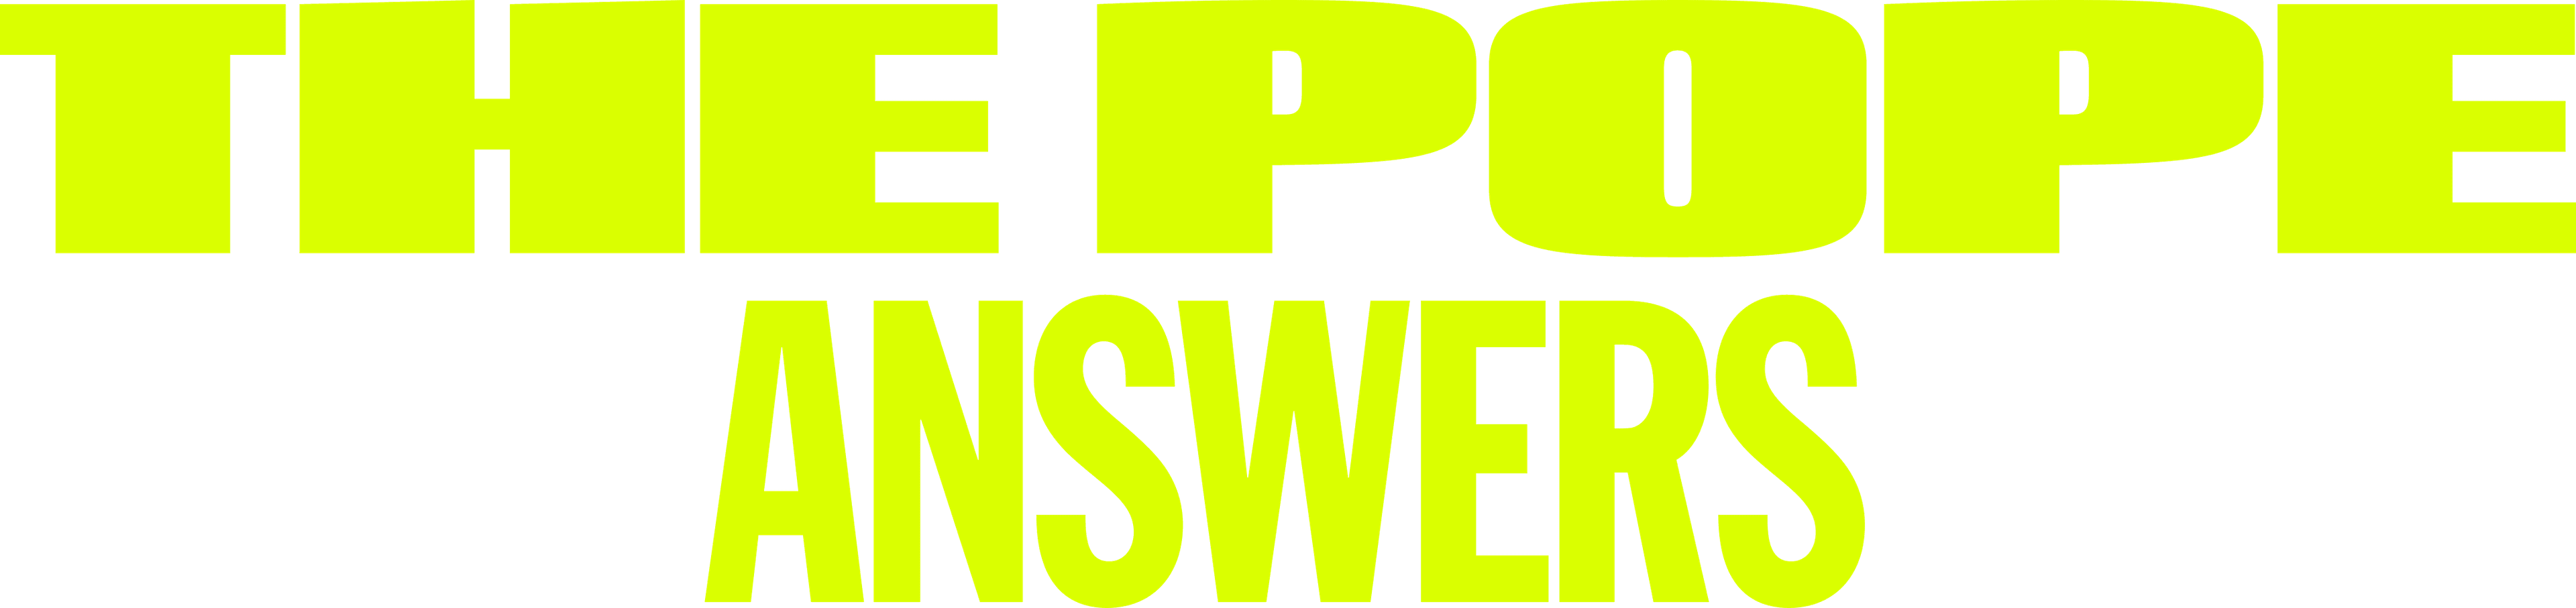 The Pope: Answers logo